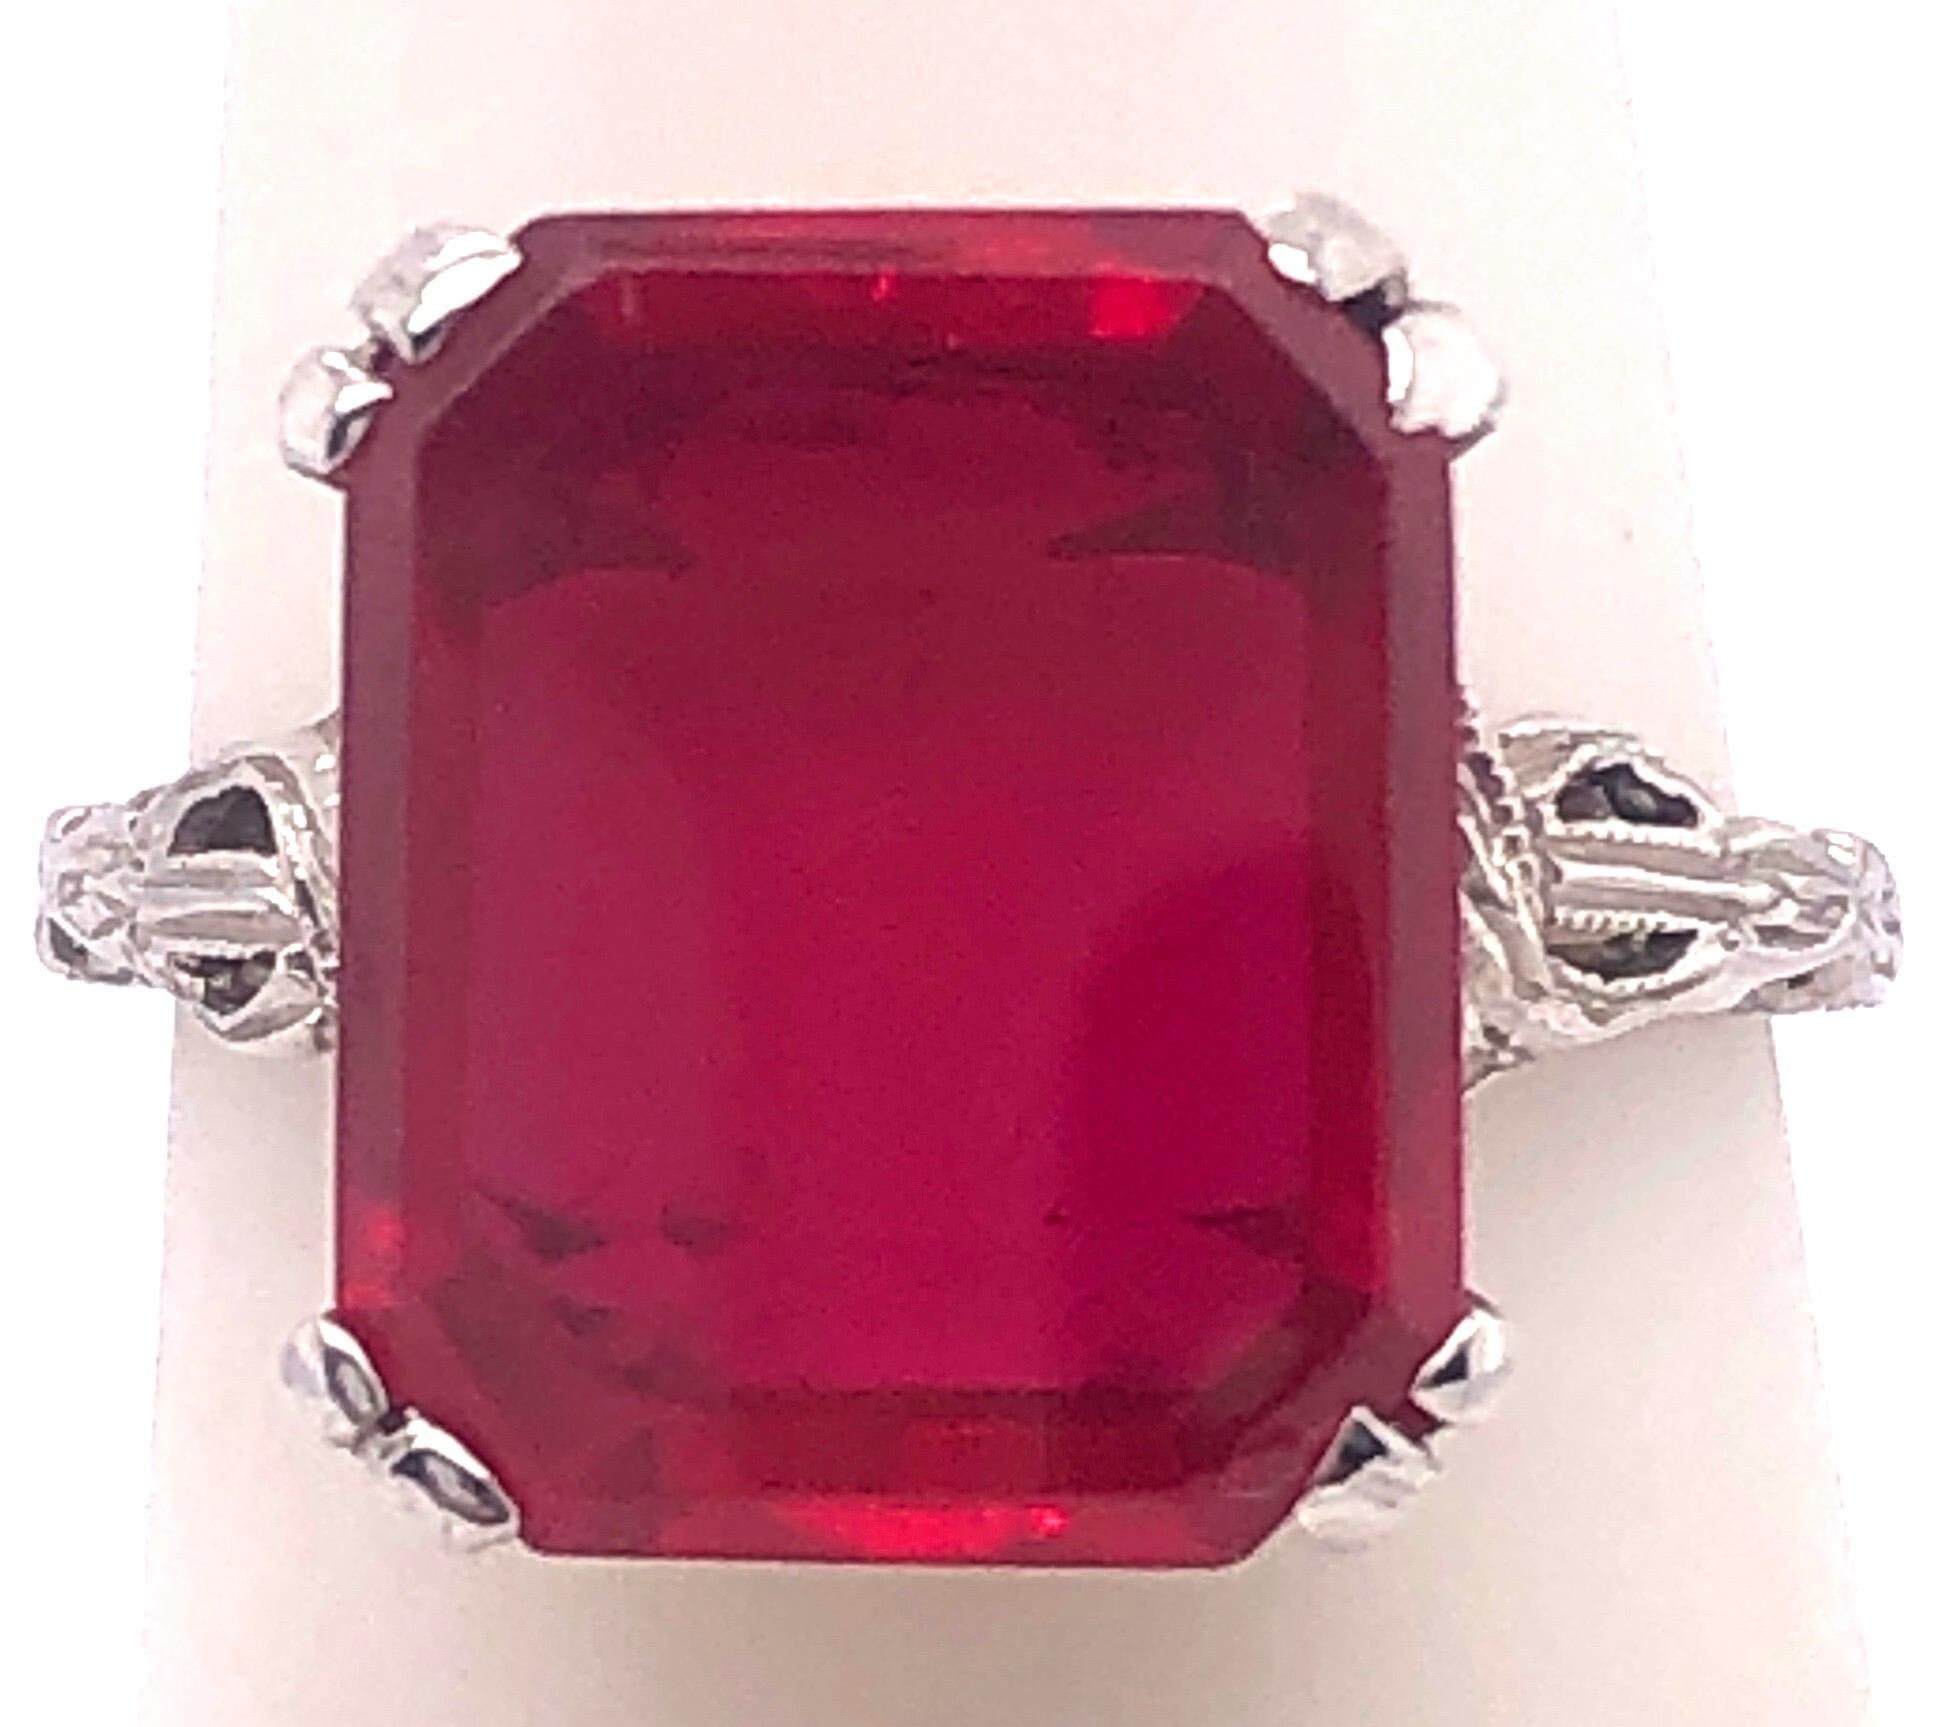 14 Karat White Gold Contemporary Ruby style Ring.
Size 4.5
3.10 grams total weight.